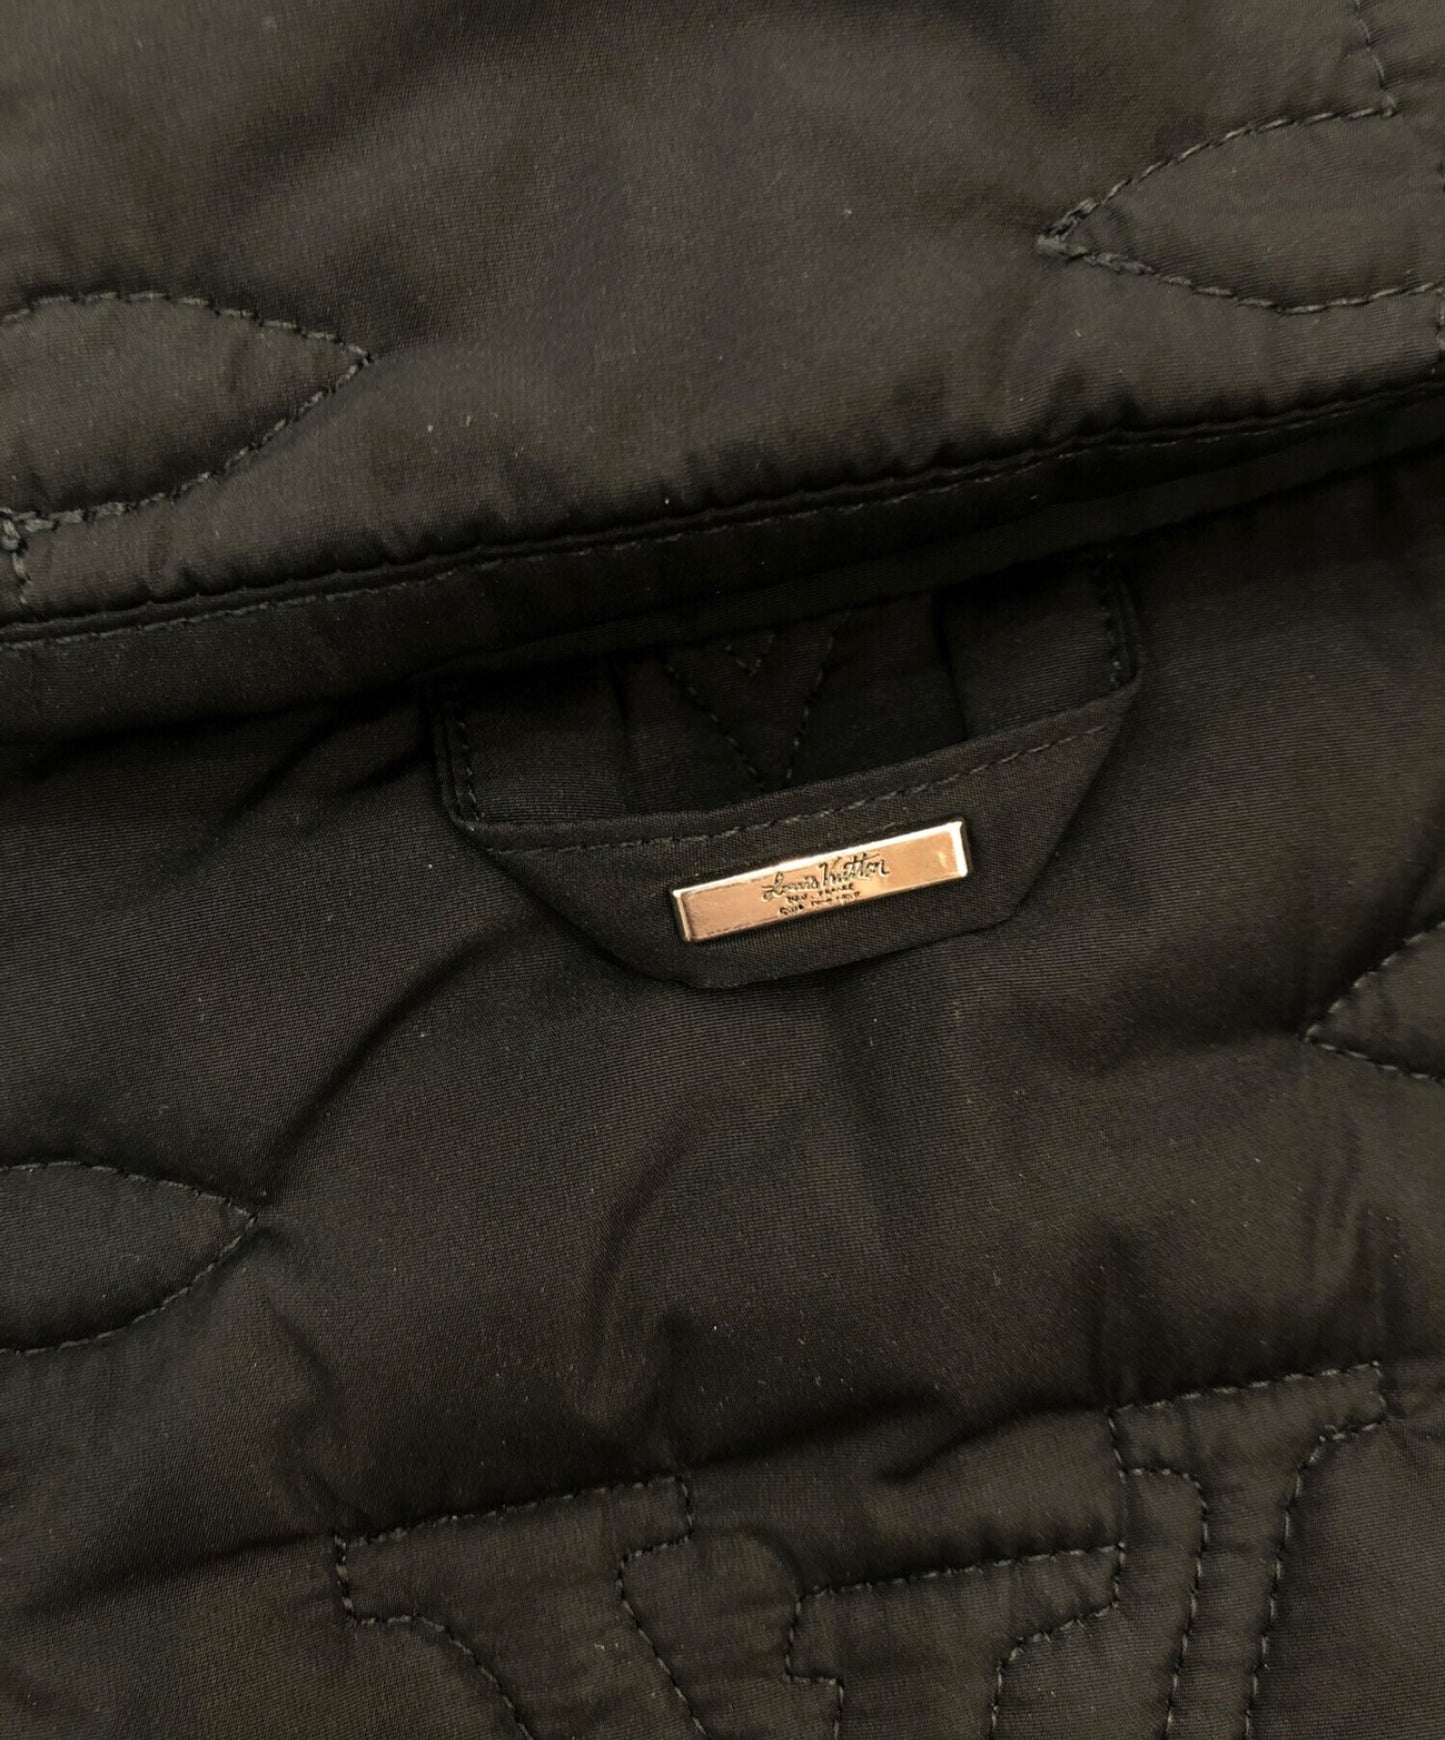 [Pre-owned] LOUIS VUITTON quilted jacket 1A5VAN